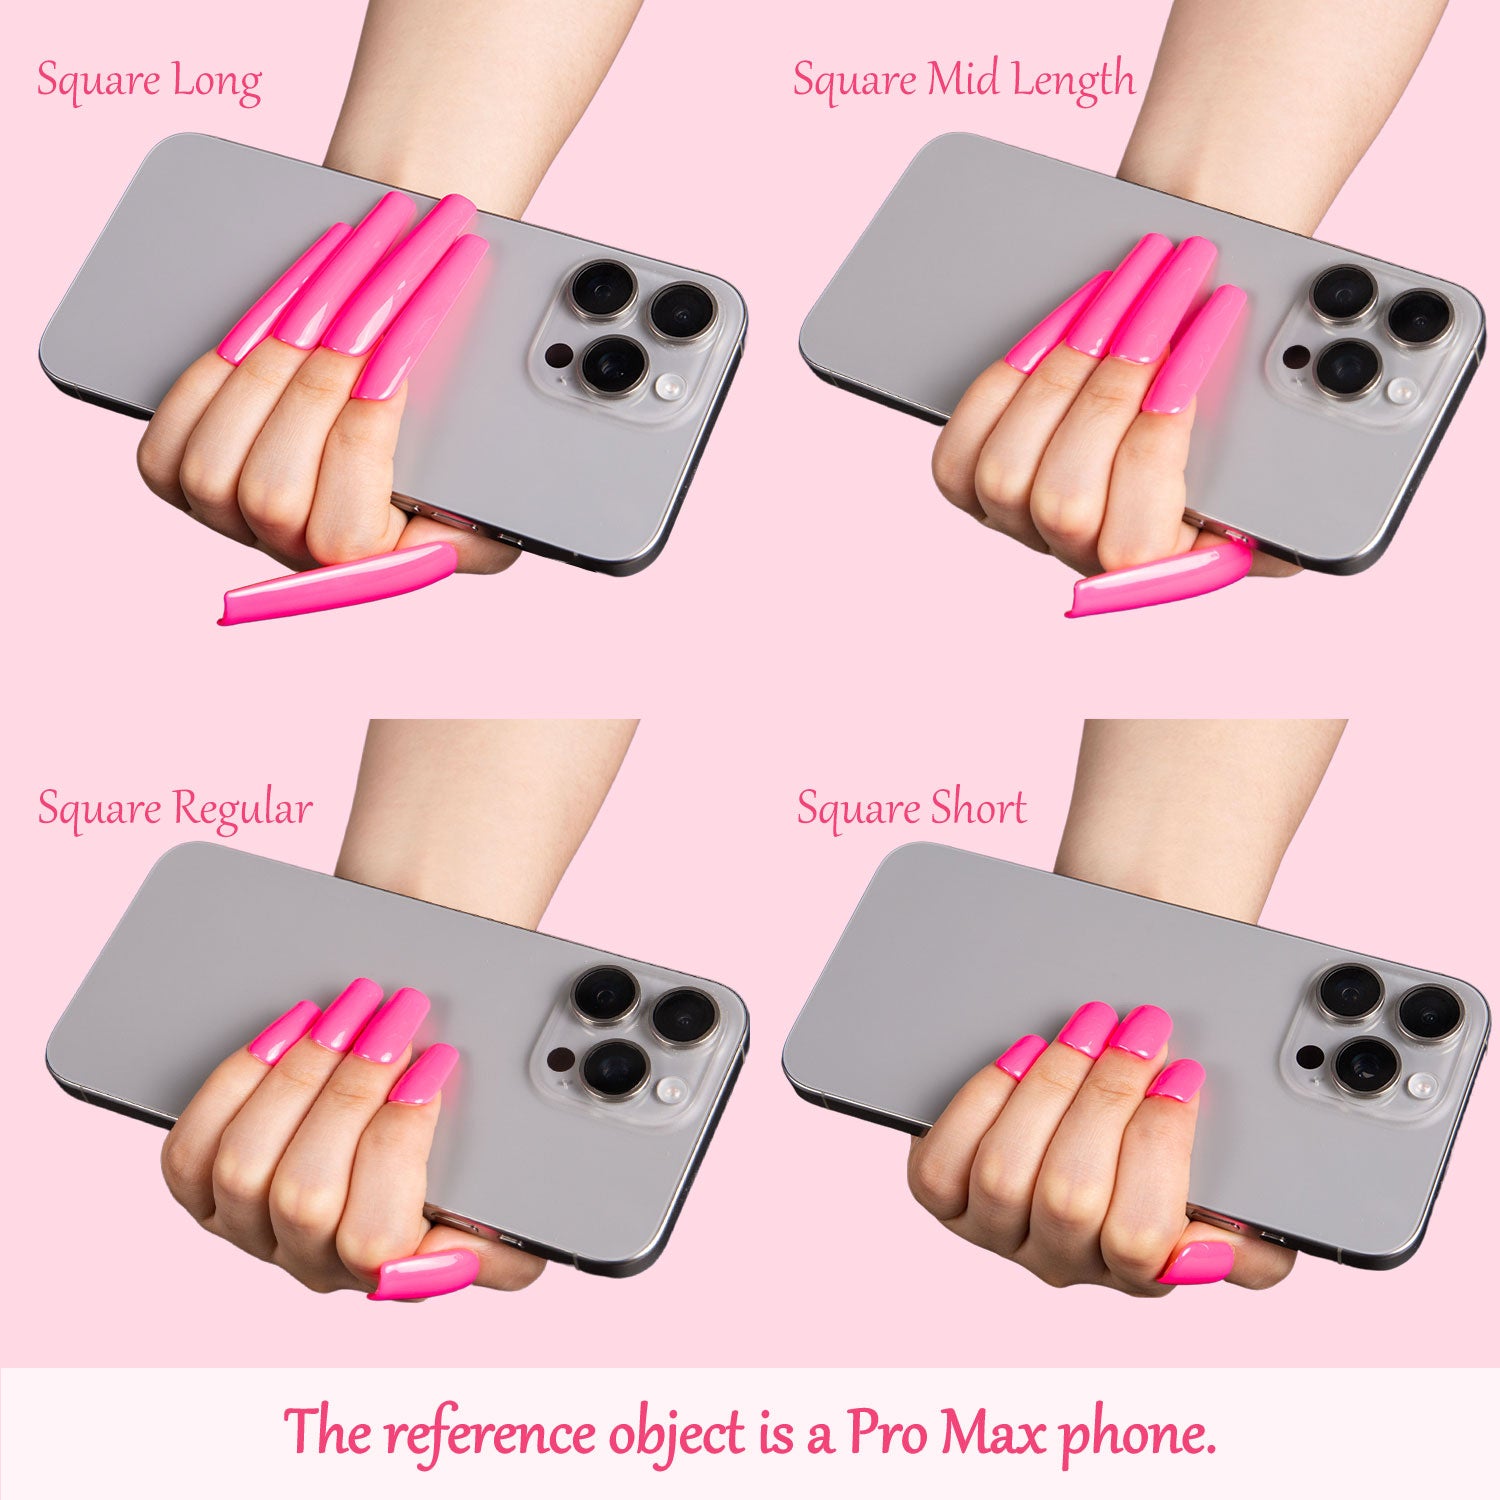 Comparison of four hand-held Pro Max phones to showcase different lengths of bright pink, square-shaped press-on nails labeled as Square Long, Square Mid Length, Square Regular, and Square Short.